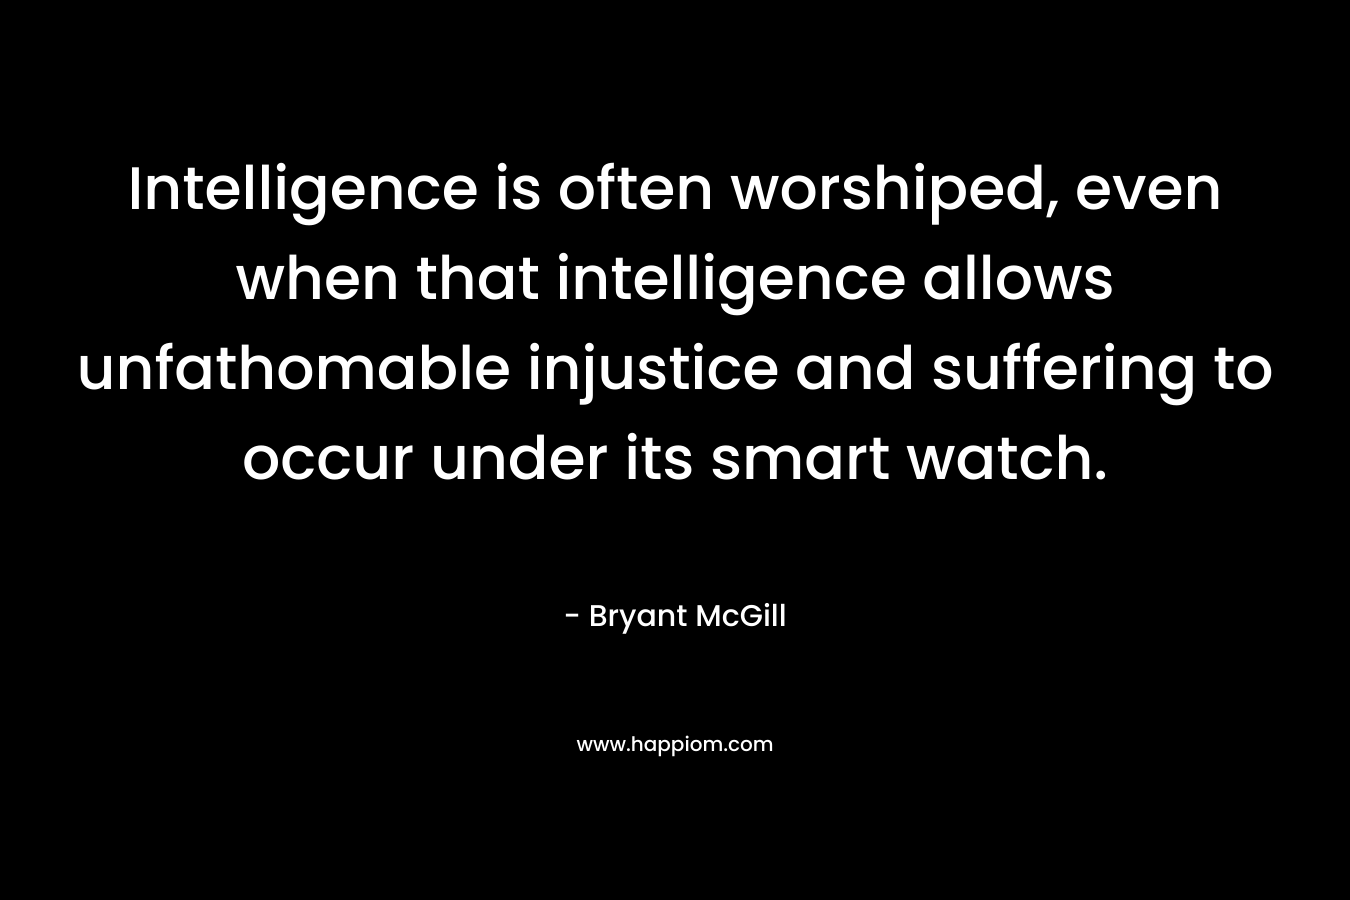 Intelligence is often worshiped, even when that intelligence allows unfathomable injustice and suffering to occur under its smart watch.